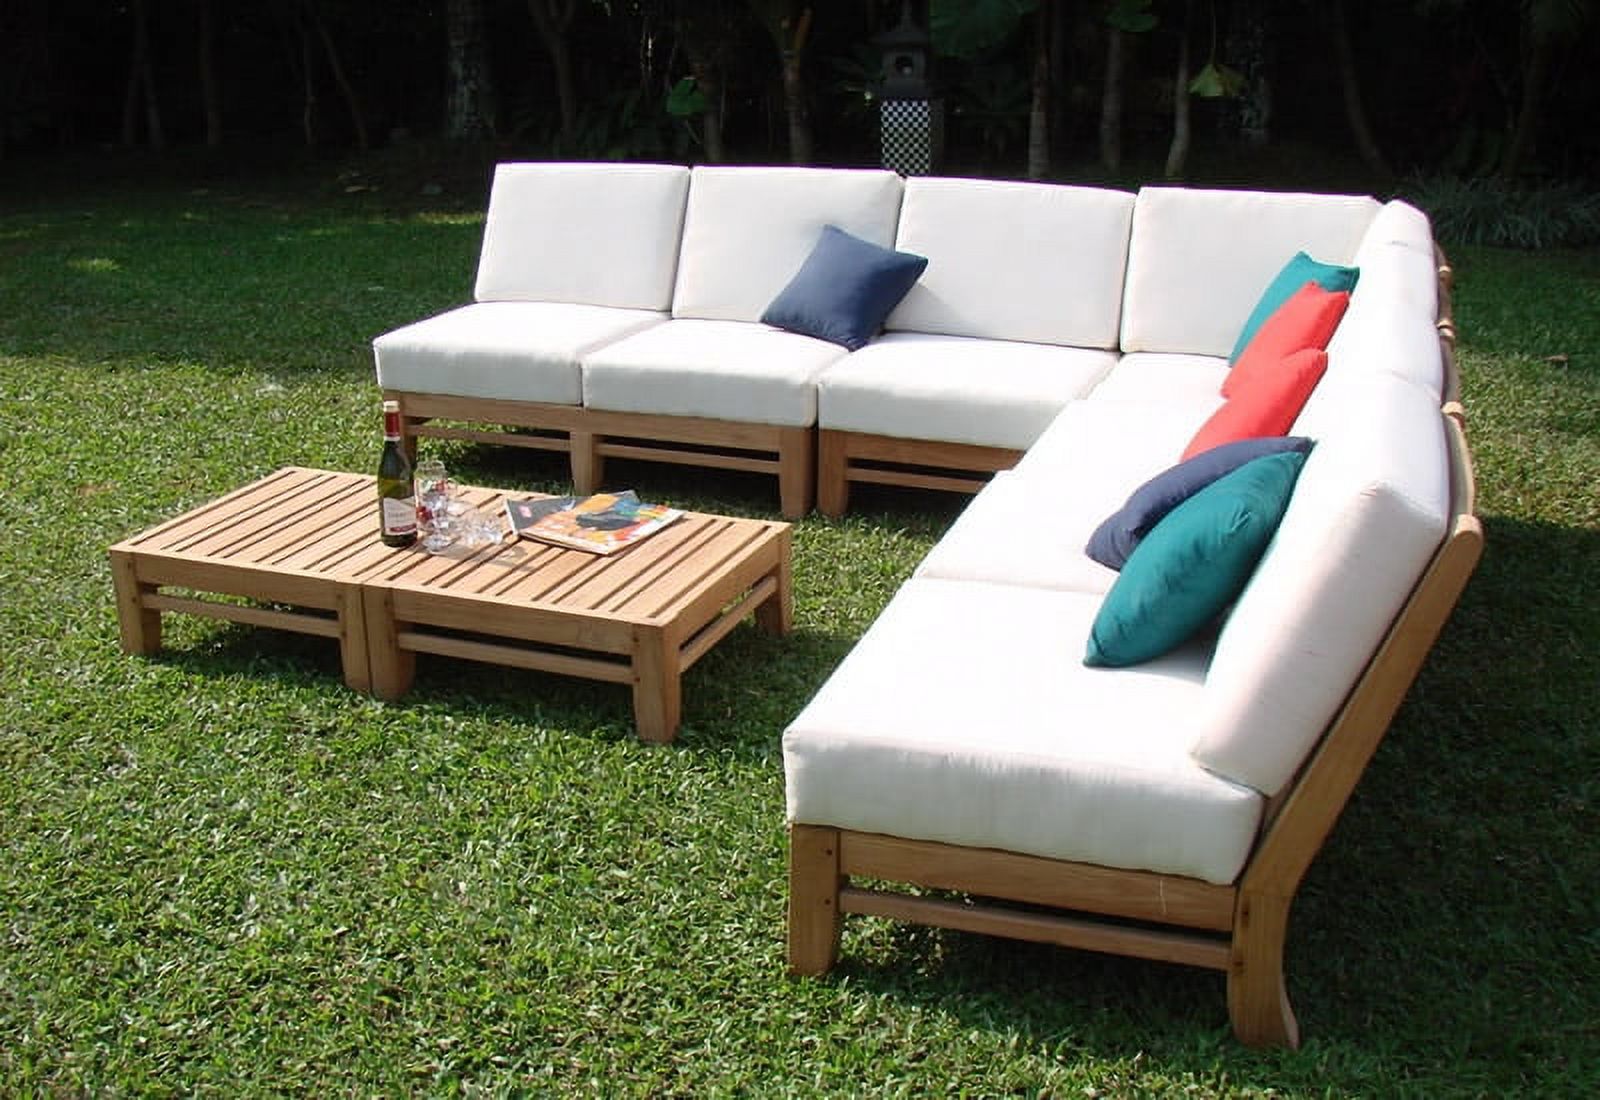 WholesaleTeak Outdoor Patio Grade-A Teak Wood 7 Piece Teak Sectional Sofa Set - 2 Love Seats, 2 Lounge Chair, 1 Corner Pc, 1 Ottoman & 1 Side Table - Furniture only -- Ramled collection #WMSSRM1 - image 4 of 5